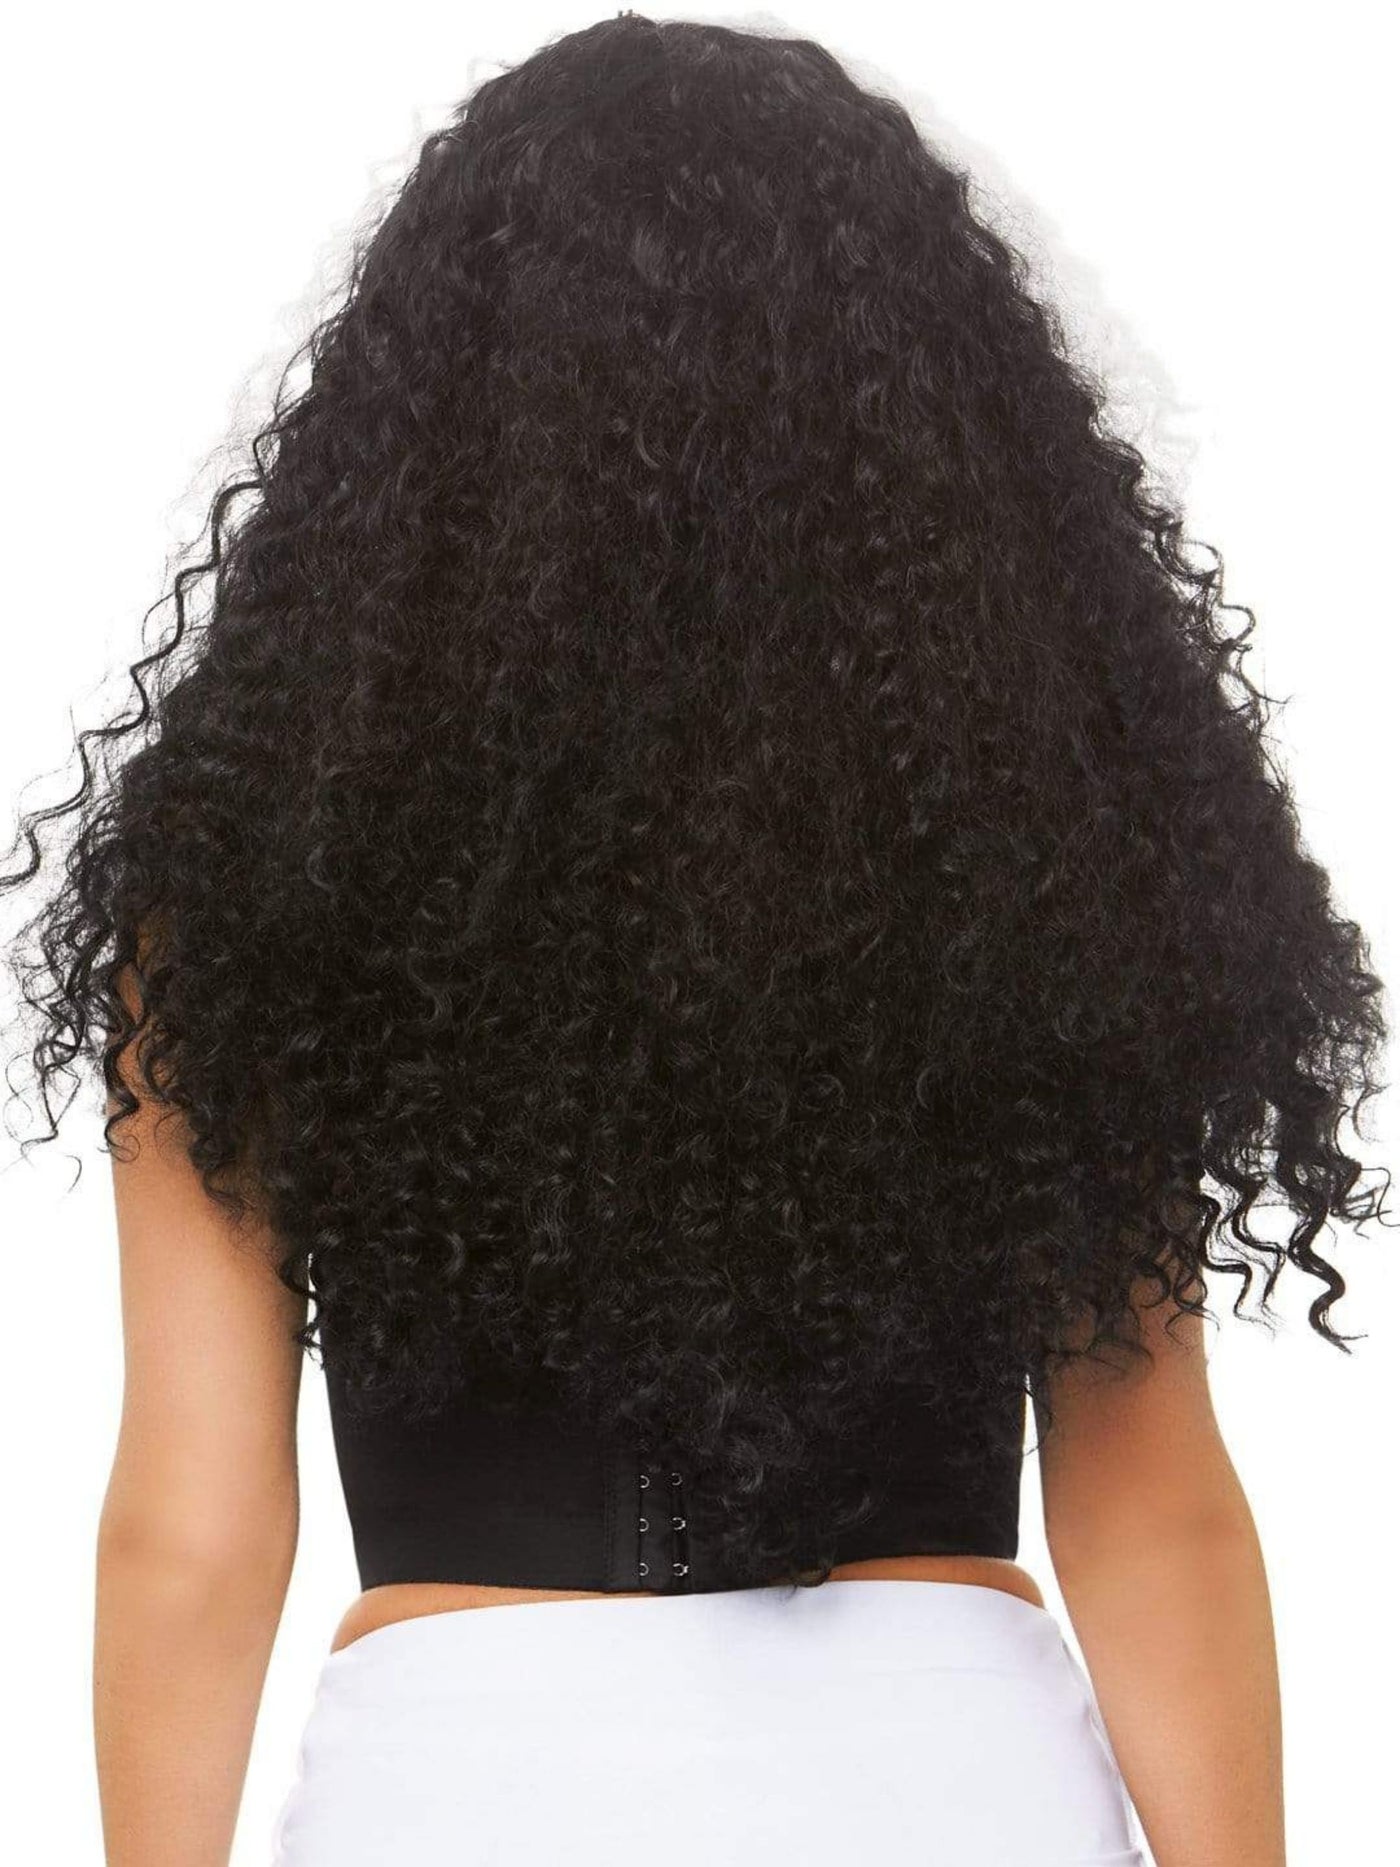 Long Curly Black & White Costume Wig